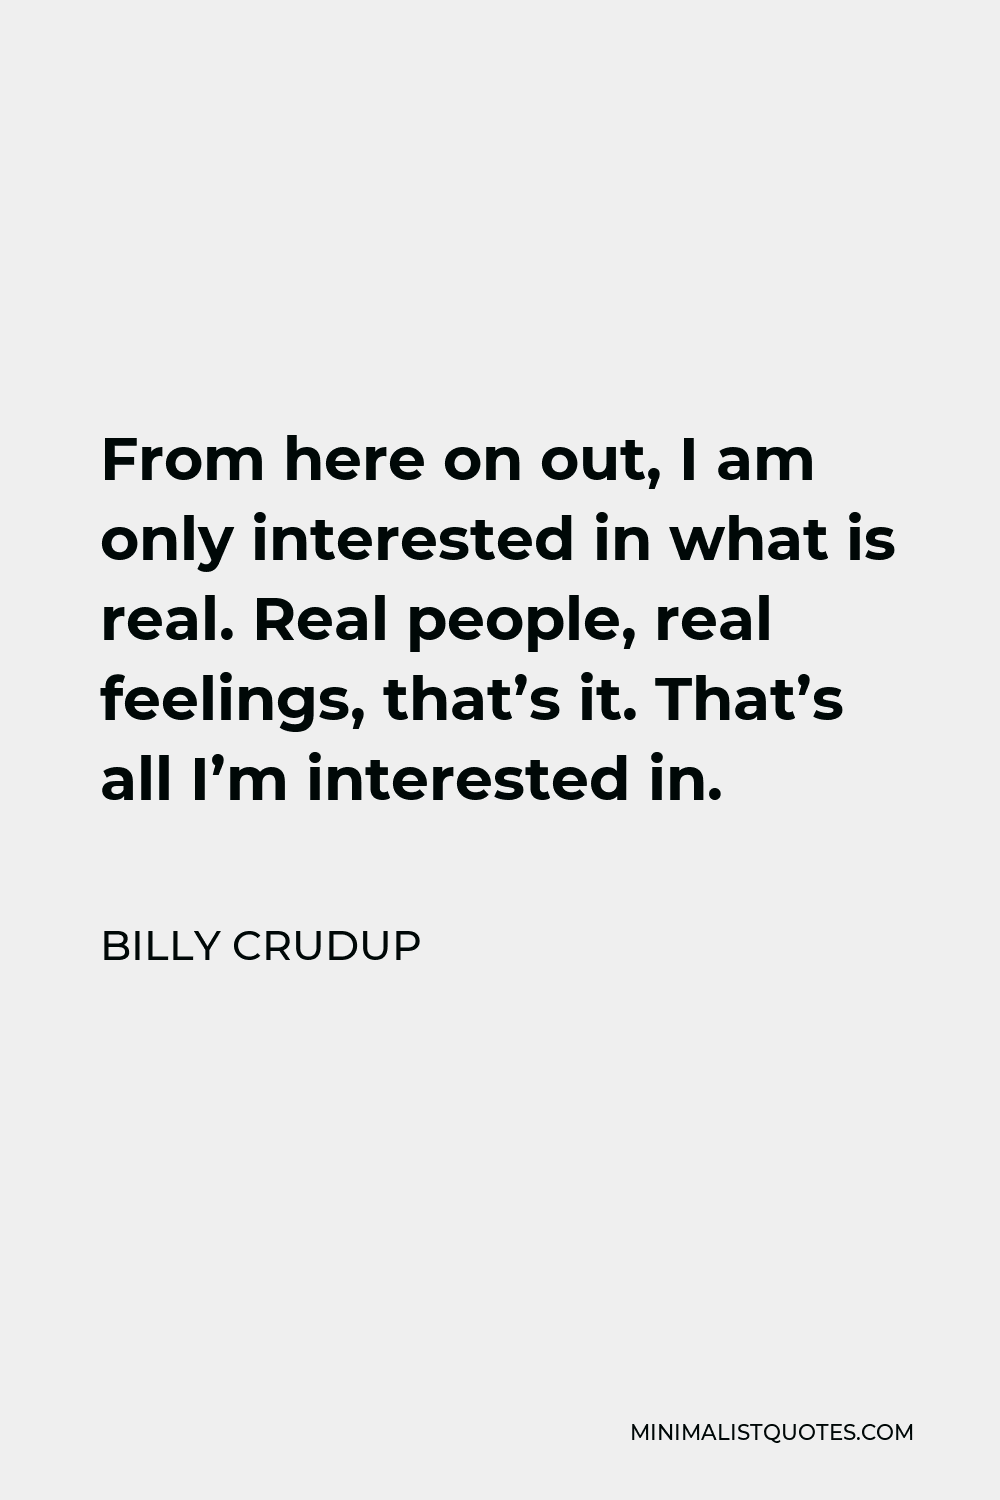 Billy Crudup Quote - From here on out, I am only interested in what is real. Real people, real feelings, that’s it. That’s all I’m interested in.